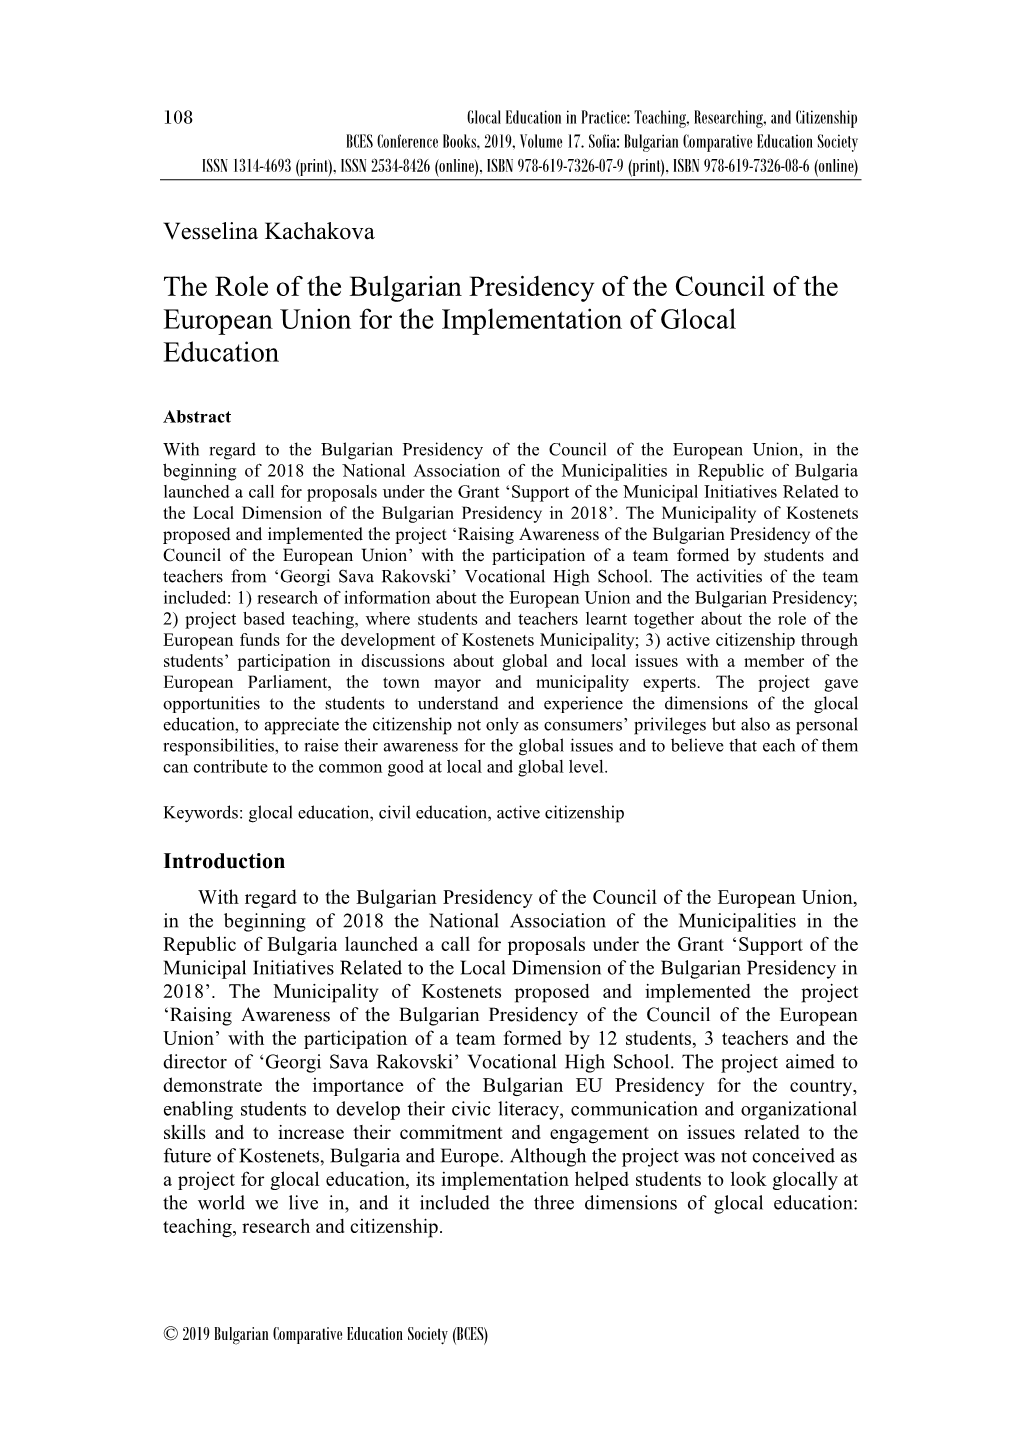 The Role of the Bulgarian Presidency of the Council of the European Union for the Implementation of Glocal Education